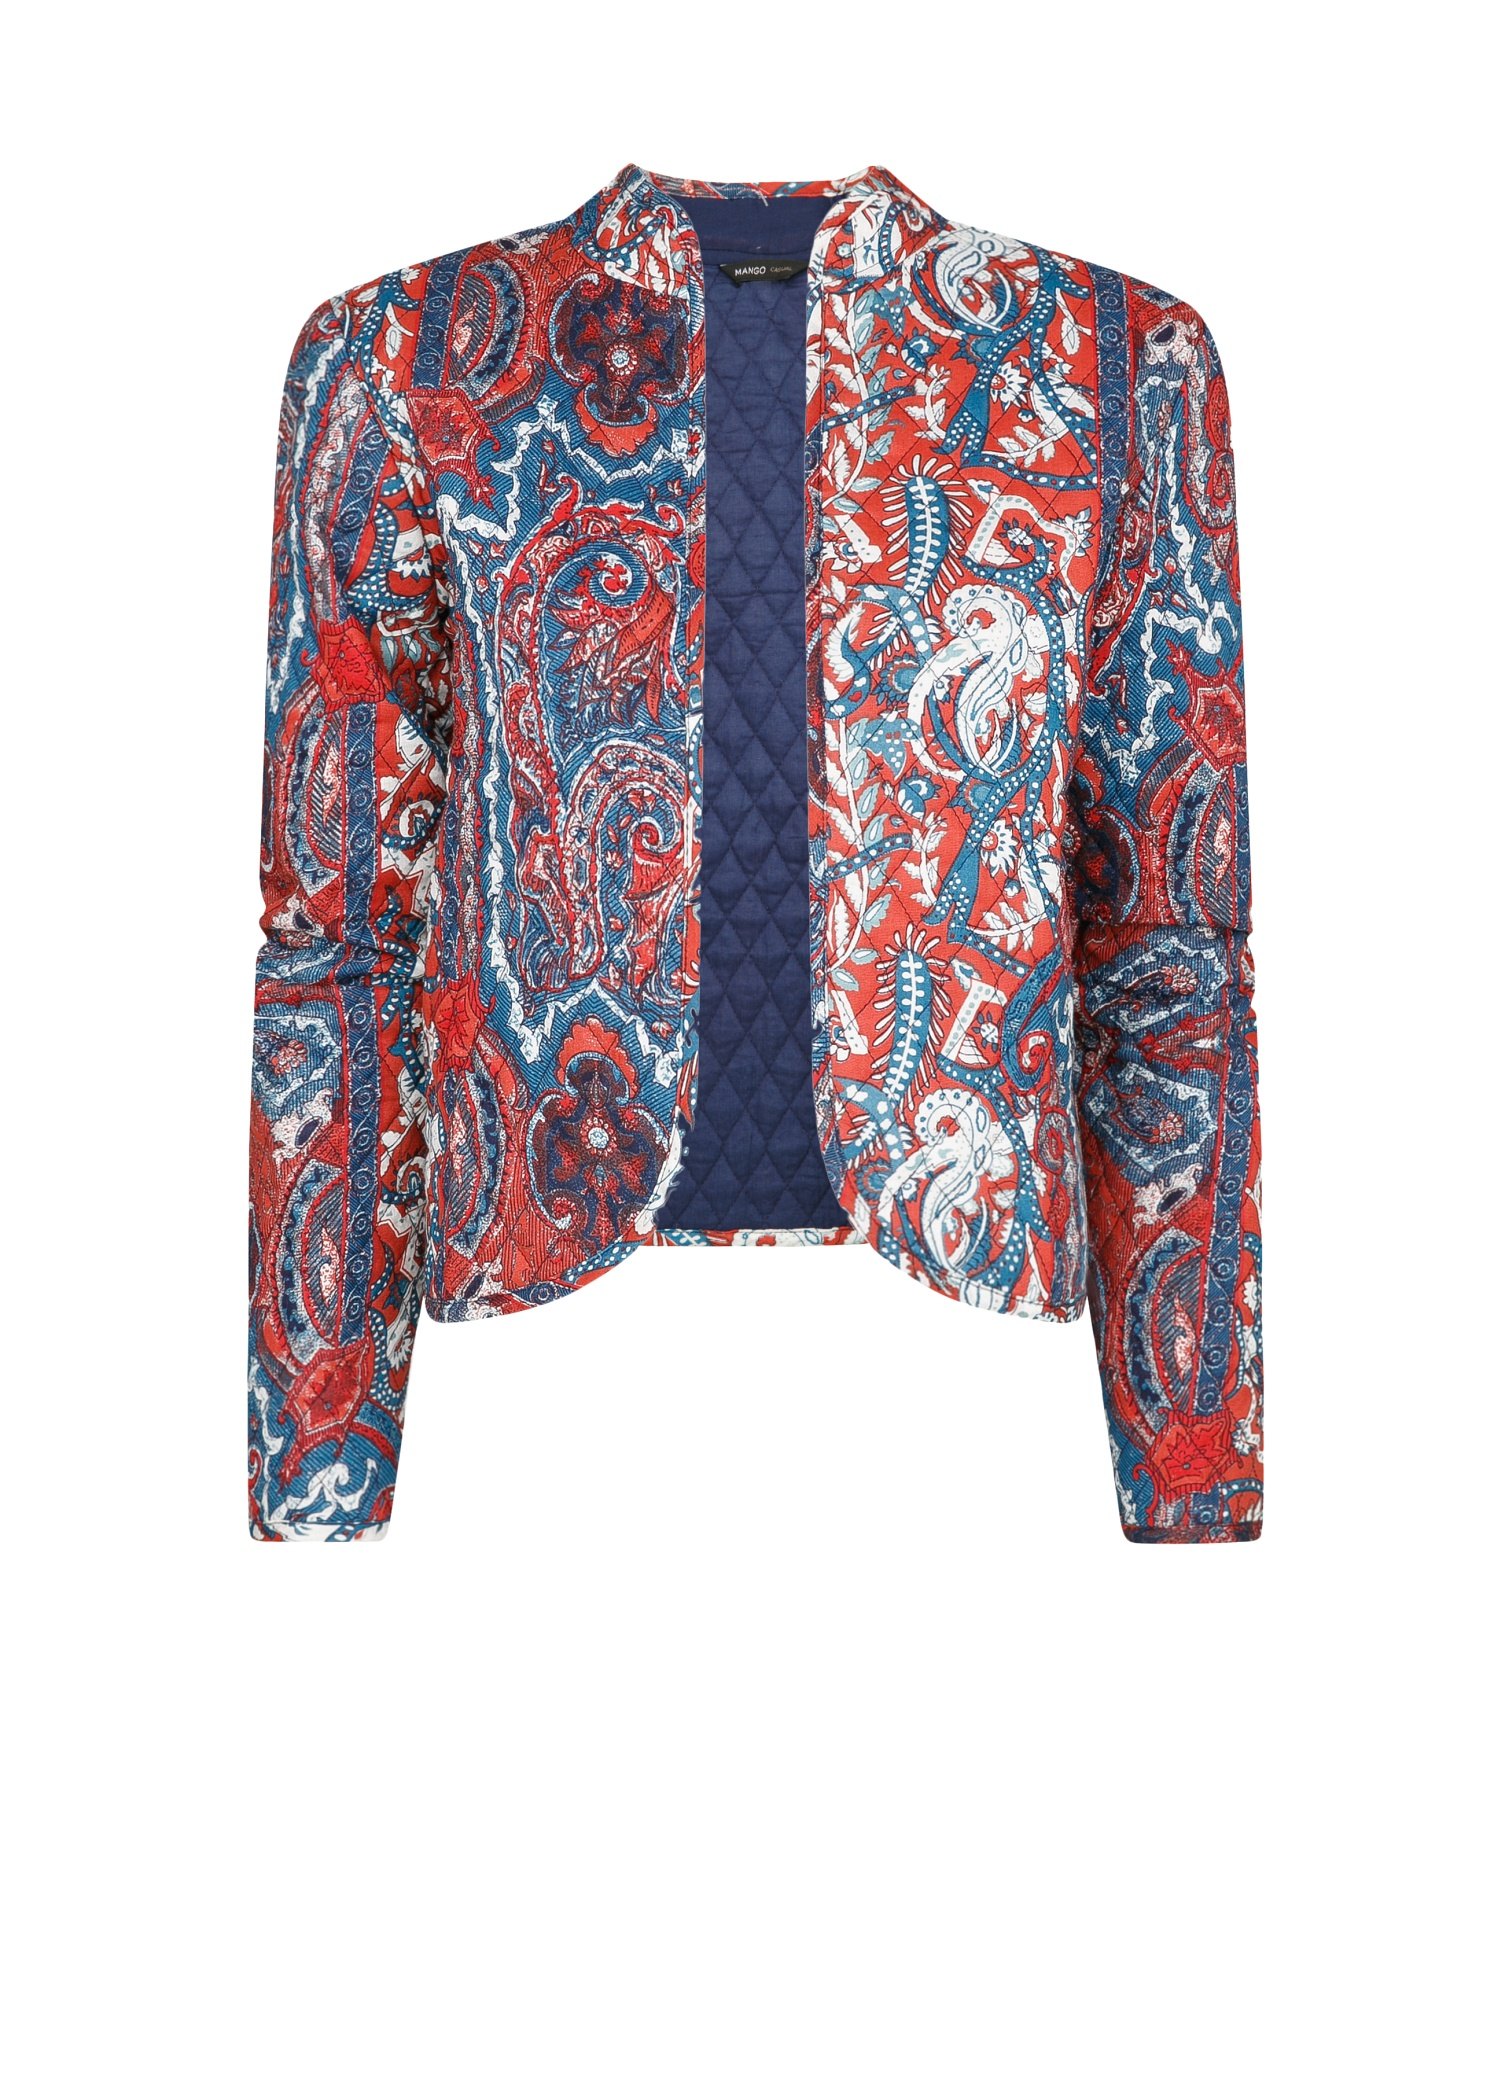 Lyst - Mango Paisley Quilted Jacket